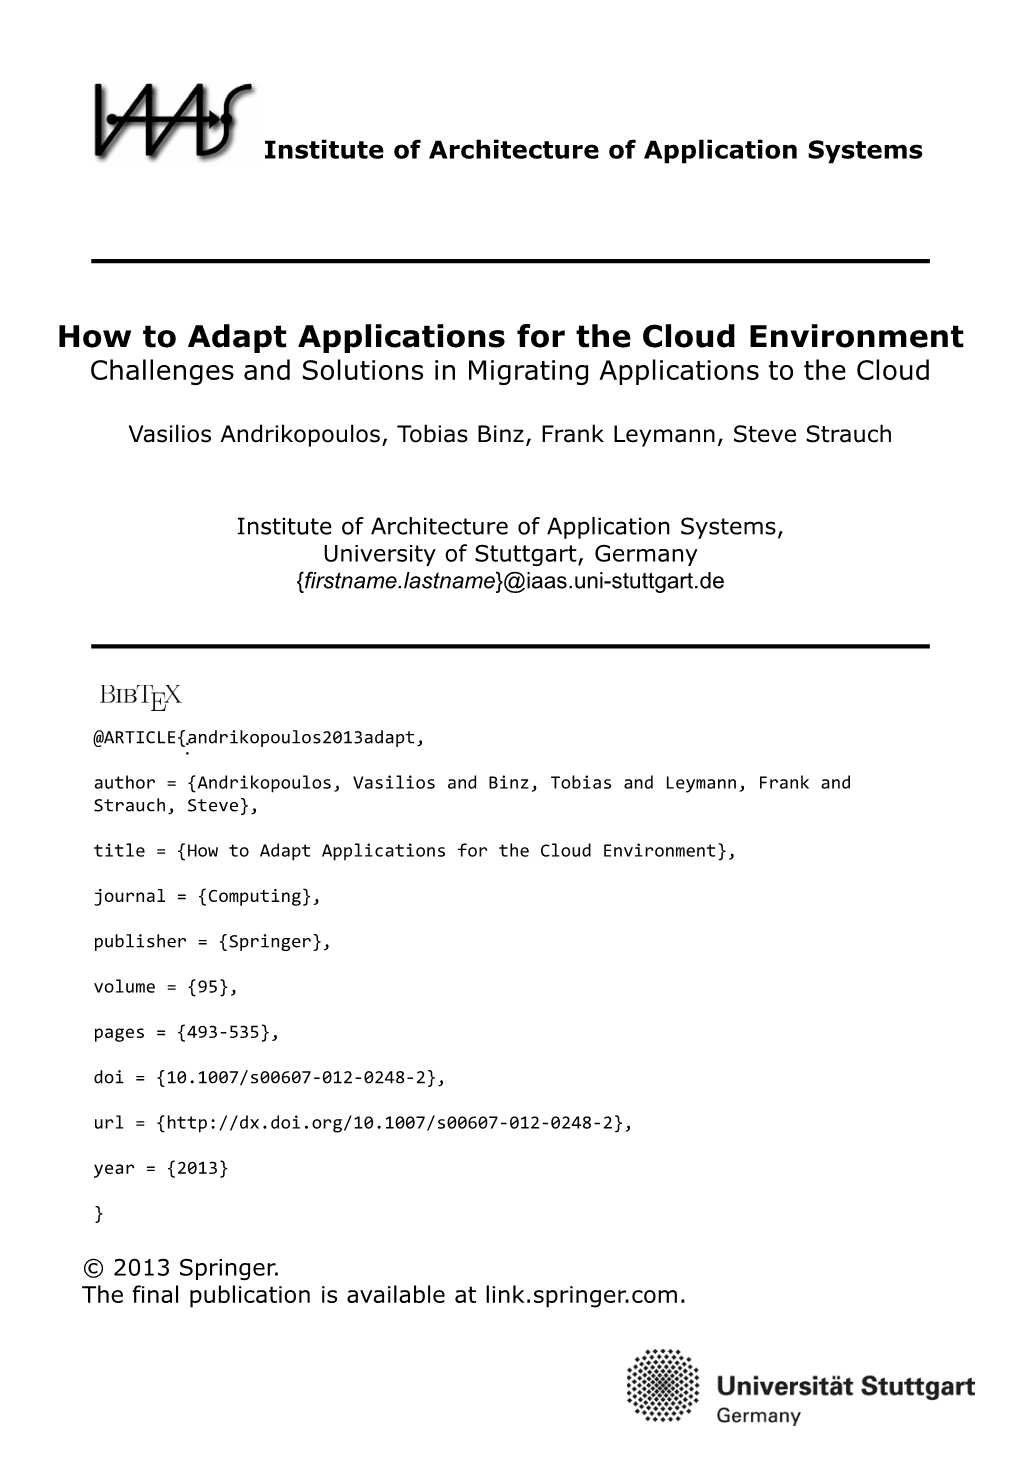 How to Adapt Applications for the Cloud Environment Challenges and Solutions in Migrating Applications to the Cloud